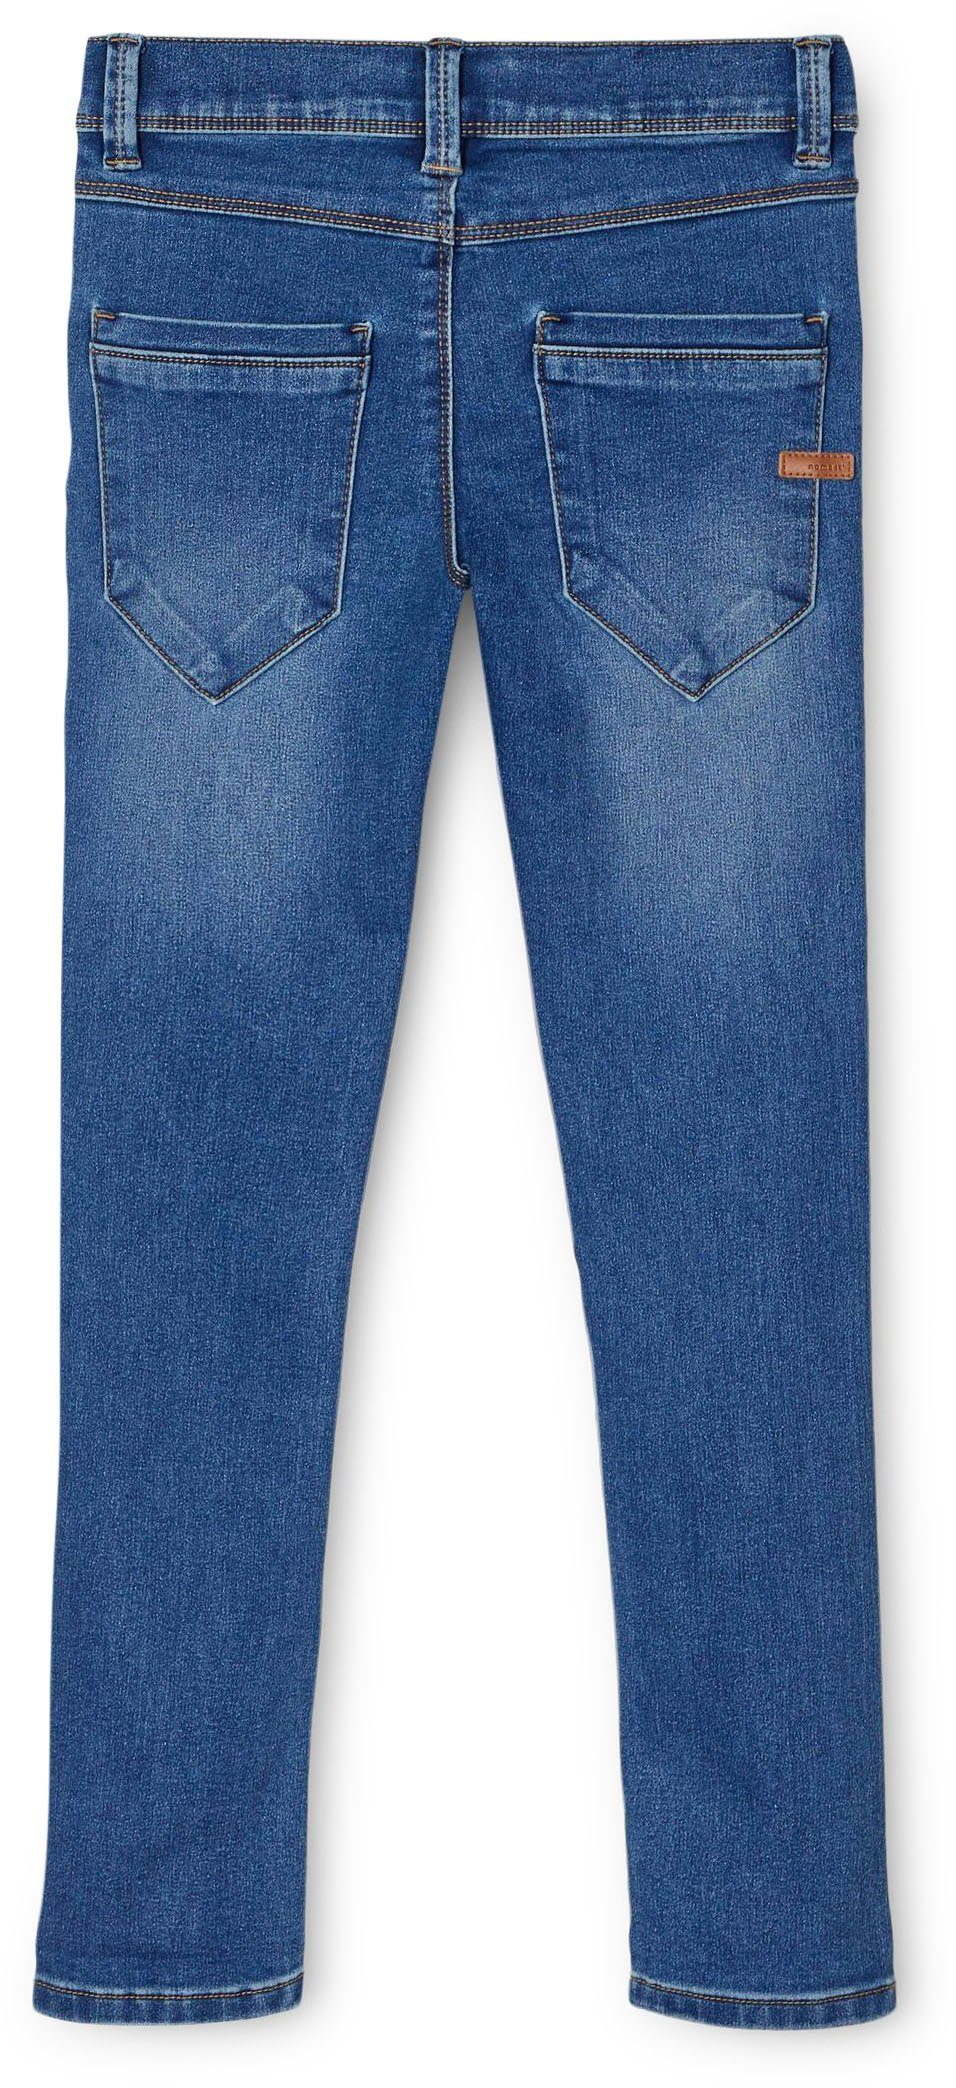 NKMSILAS PANT It Name blue DNMTAX medium Stretch-Jeans